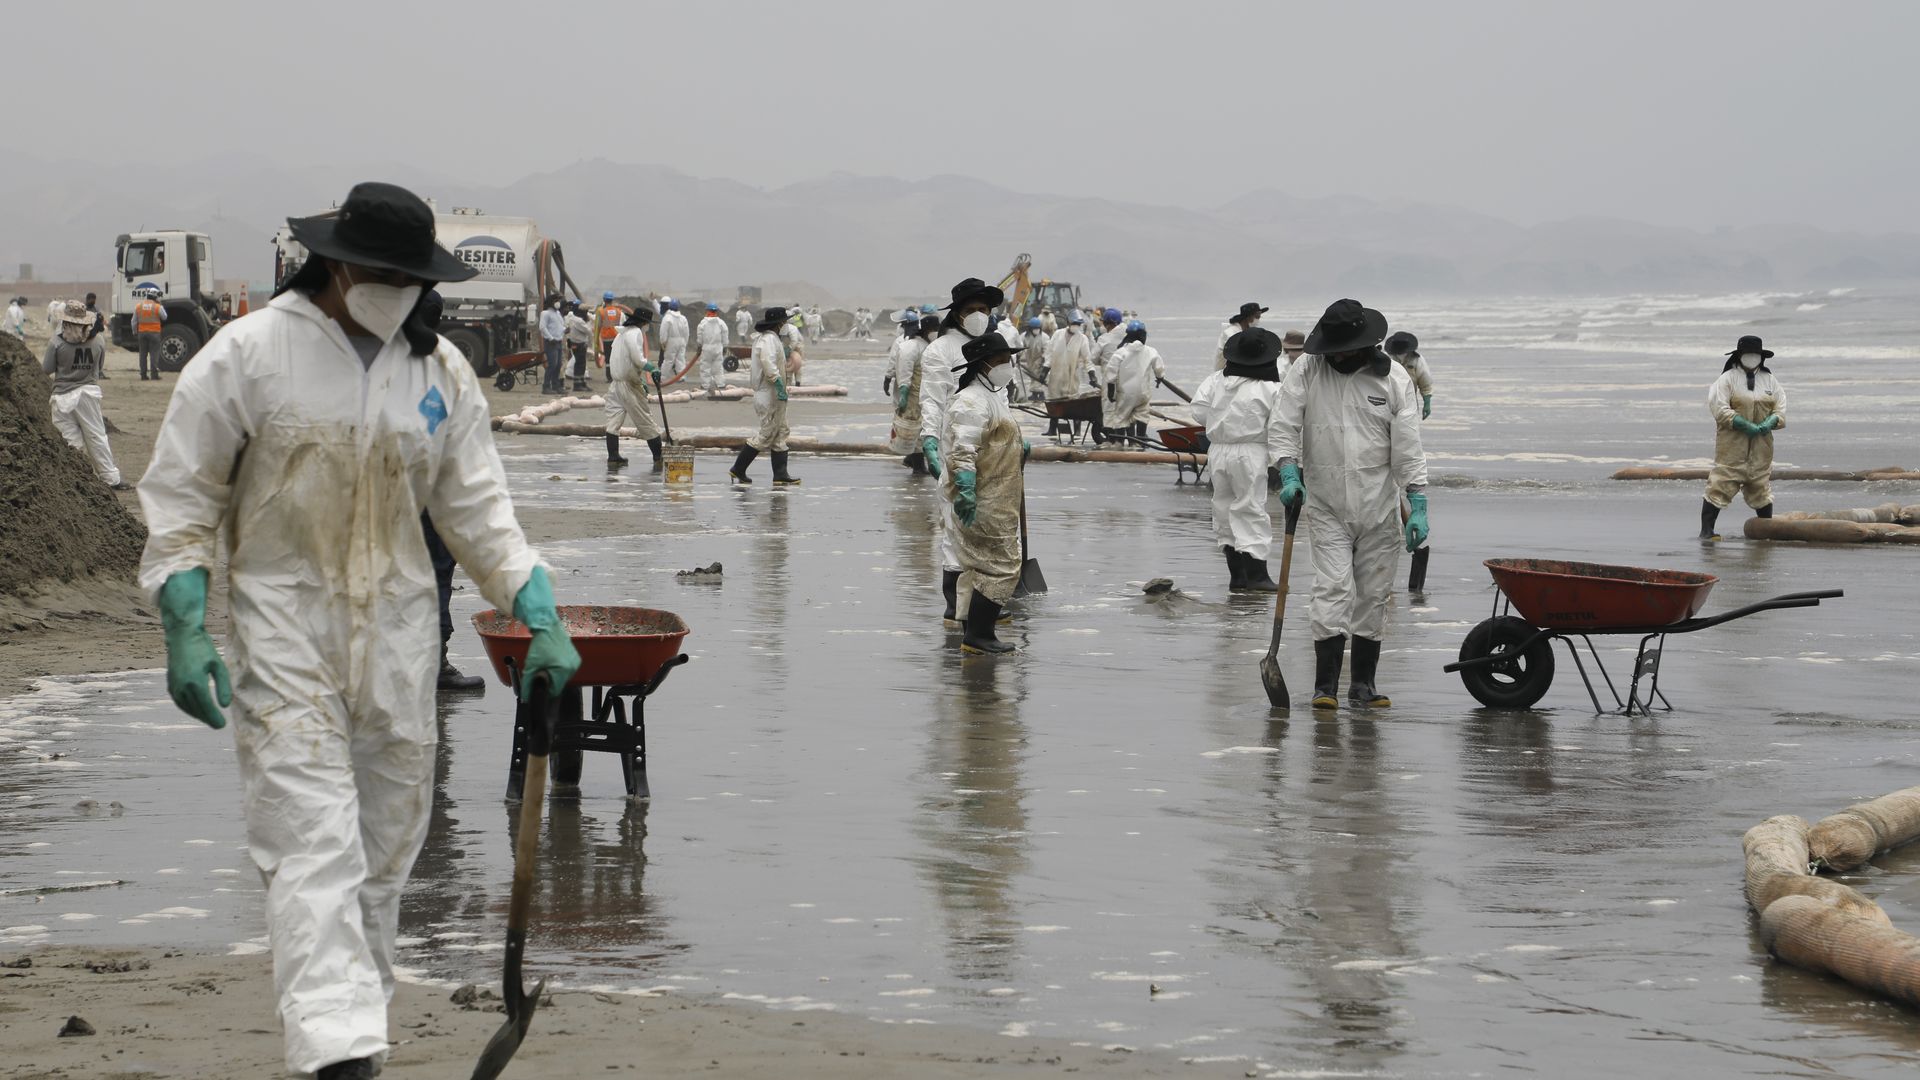 People dressed in protective suits and wearing masks clean up a beach in Peru